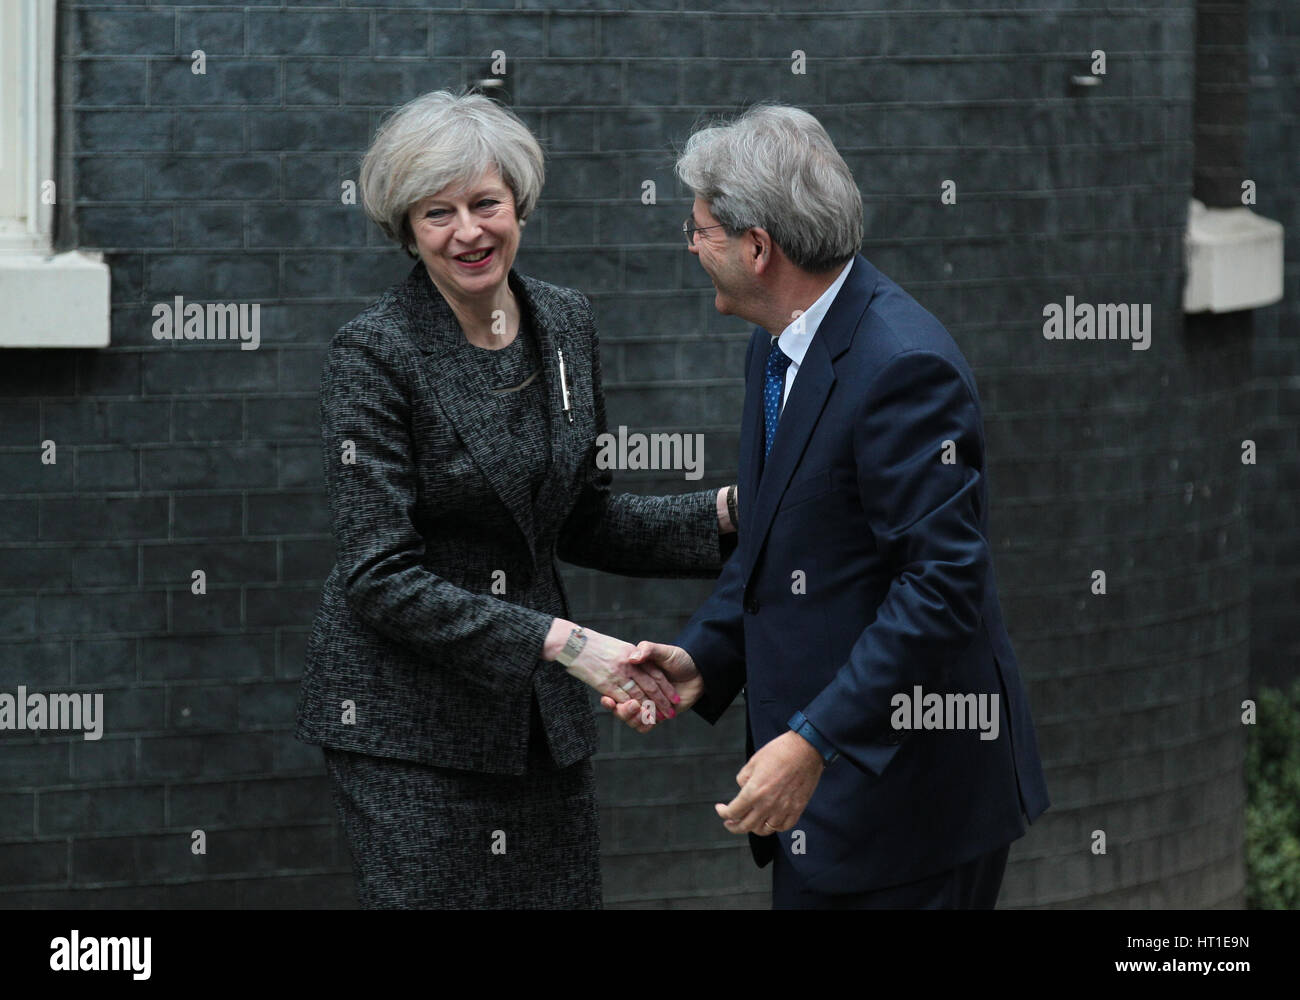 Prime Minister Theresa May and Prime Minister of Italy Paolo Gentiloni at No.10 Downing street on 9th February 2017 in London Stock Photo